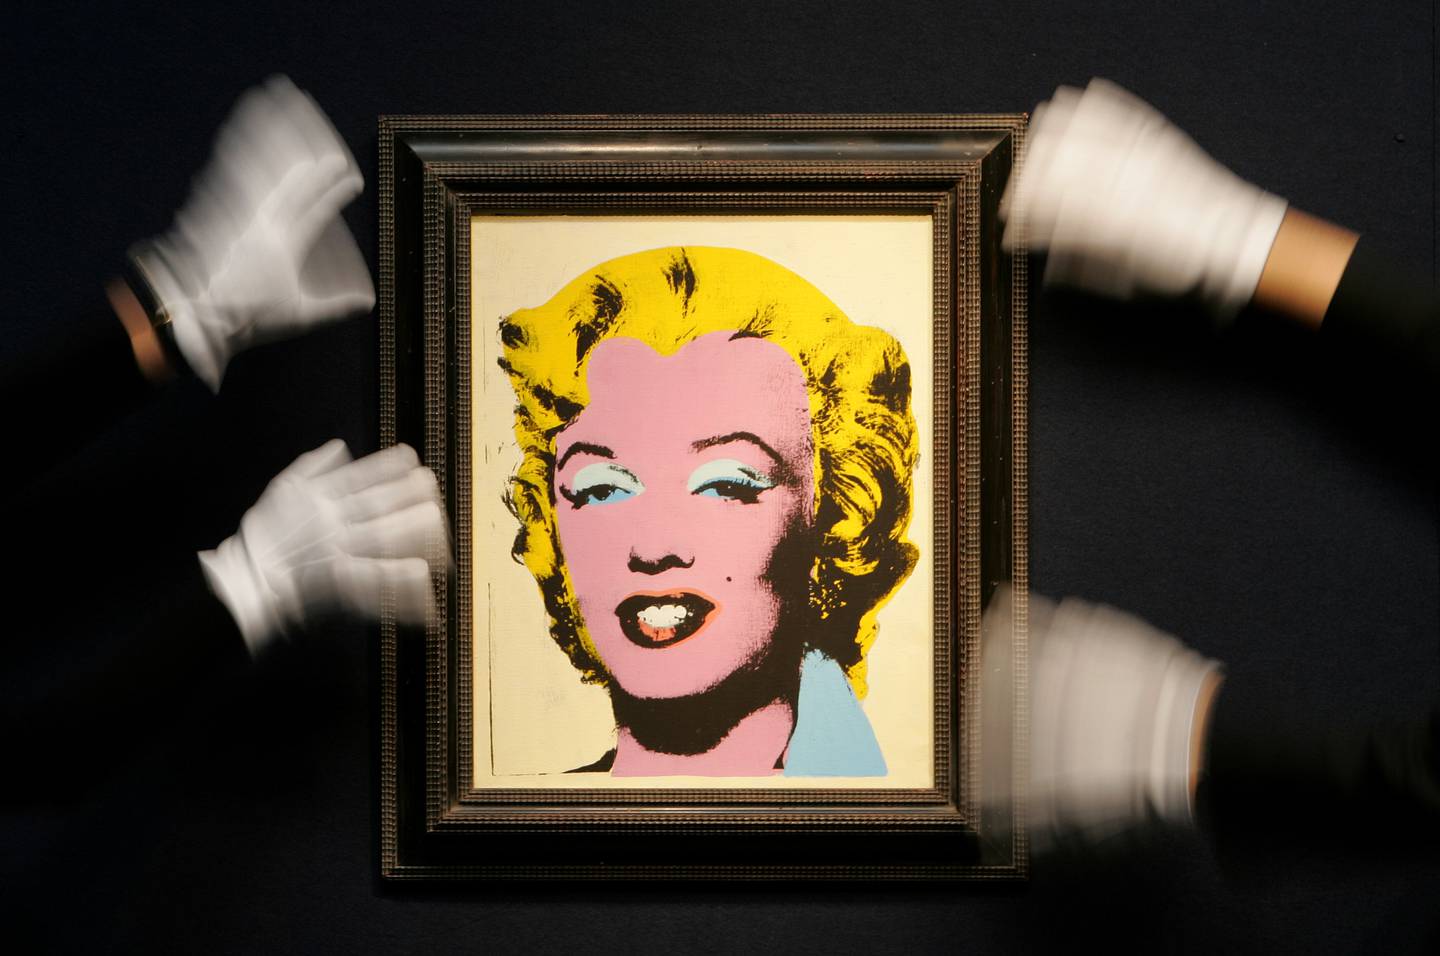 An Andy Warhol portrait of Marilyn Monroe called  'Lemon Marilyn', 1962 is hung at Christie's auction rooms in London, Monday March 19 , 2007. The portrait which was purchased by a US collector for $250 in 1962 and remained in the same ownership for nearly 45-years, is being auctioned at Christie's New York on May 16, 2007 and is expected to realize in excess of $15 million. (AP Photo/Kirsty Wigglesworth)